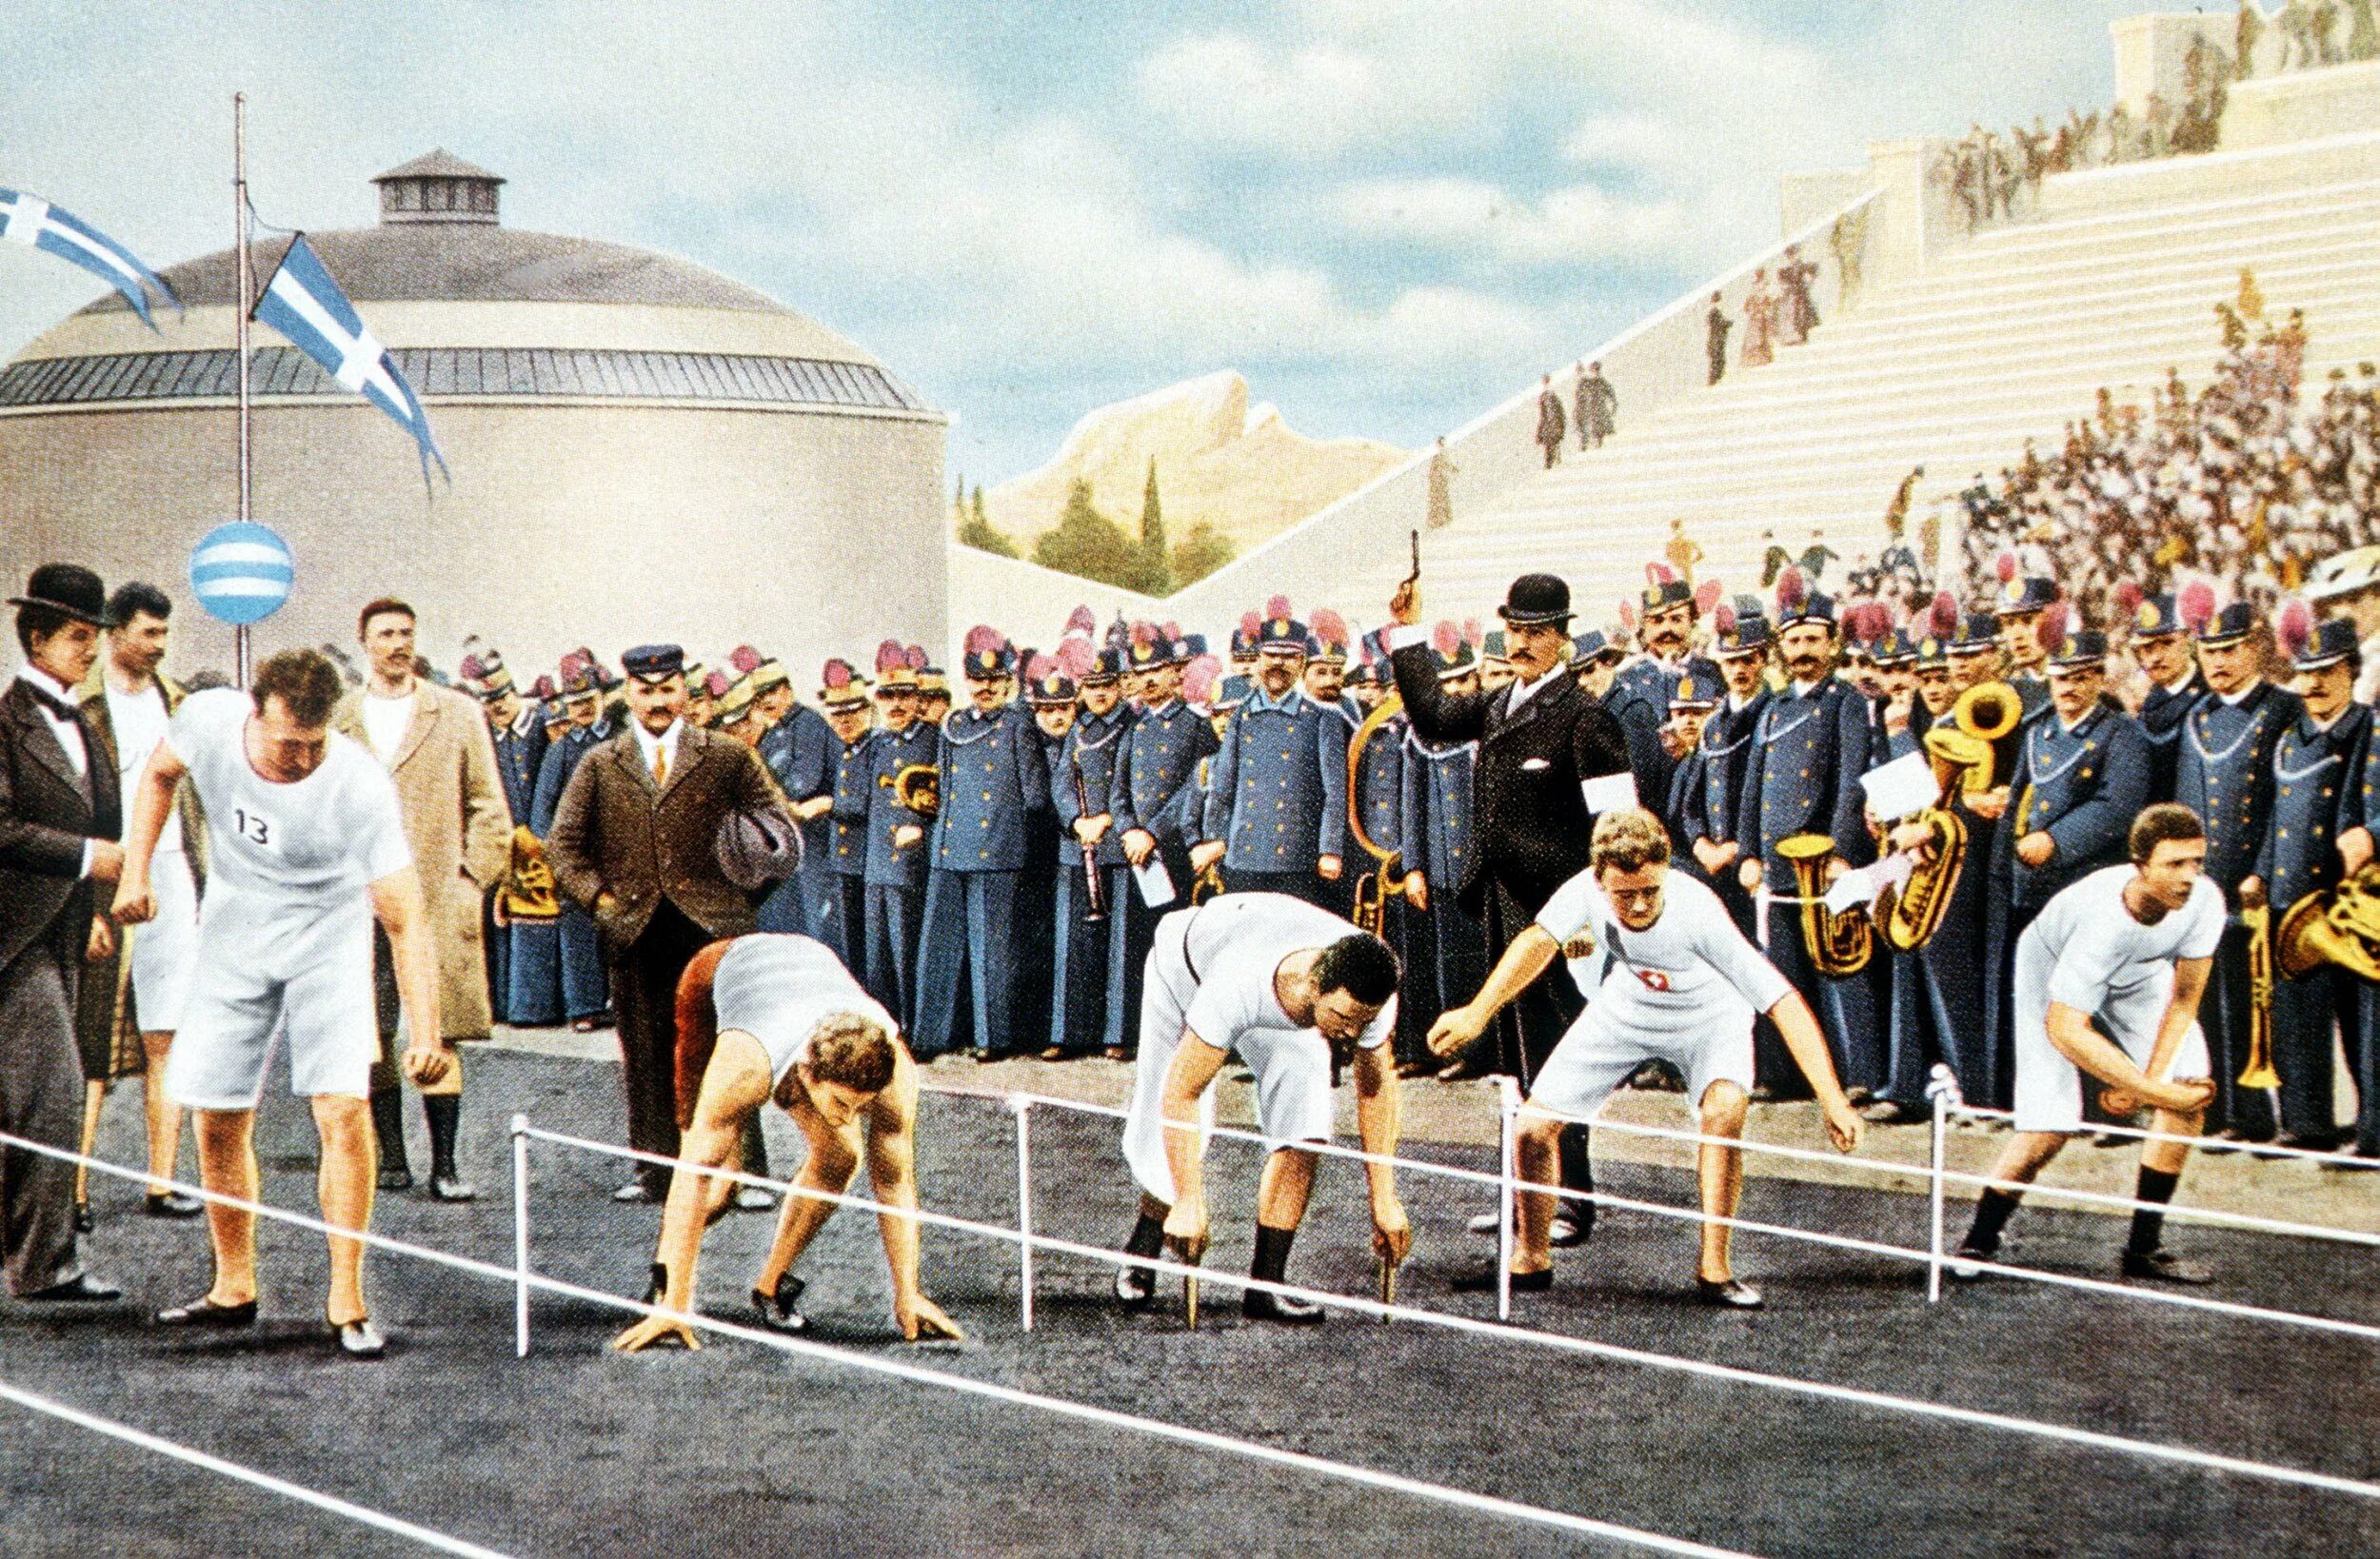 The first modern olympic games